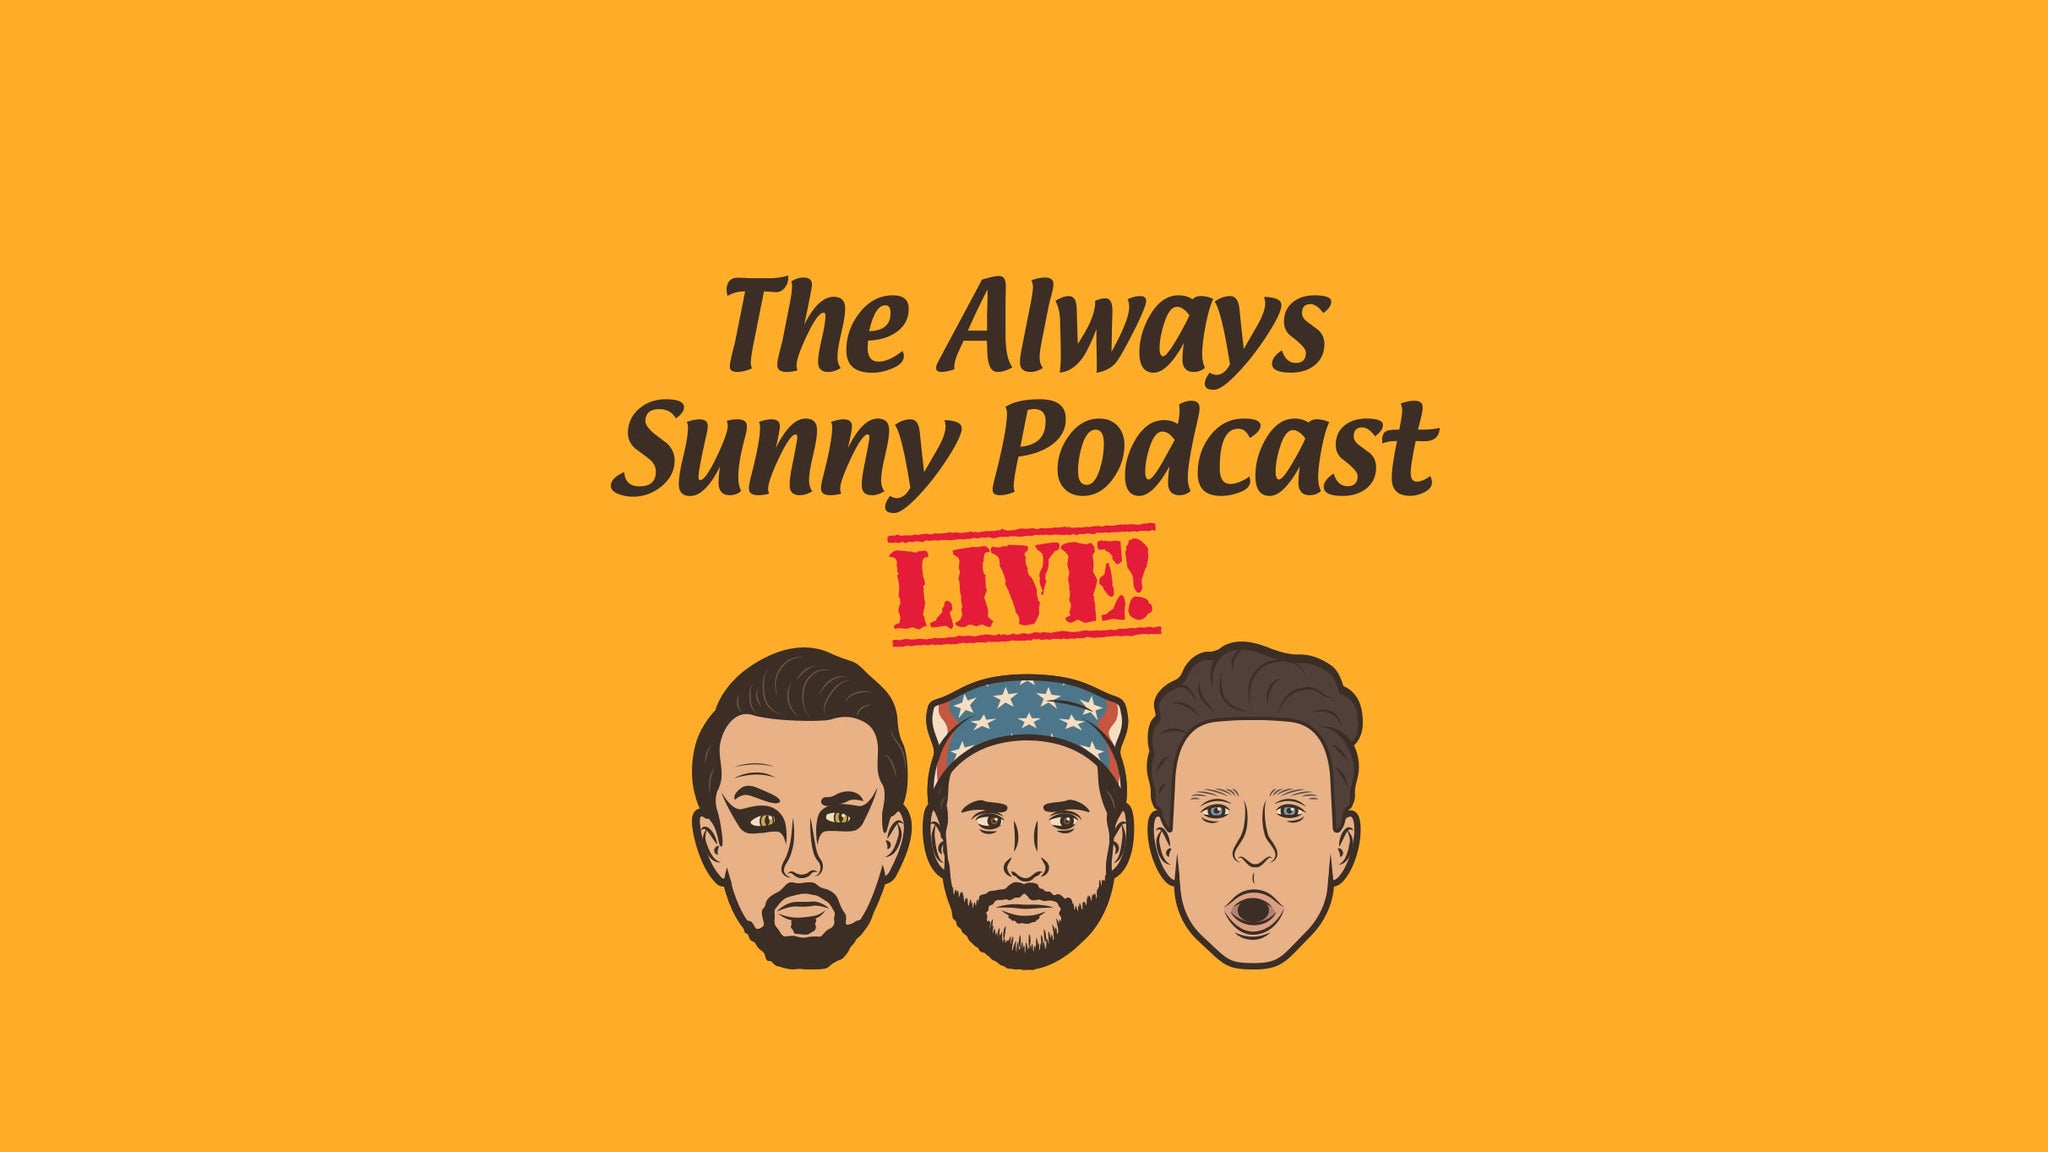 Four Walls Presents The Always Sunny Podcast LIVE! in New York promo photo for Live Nation presale offer code